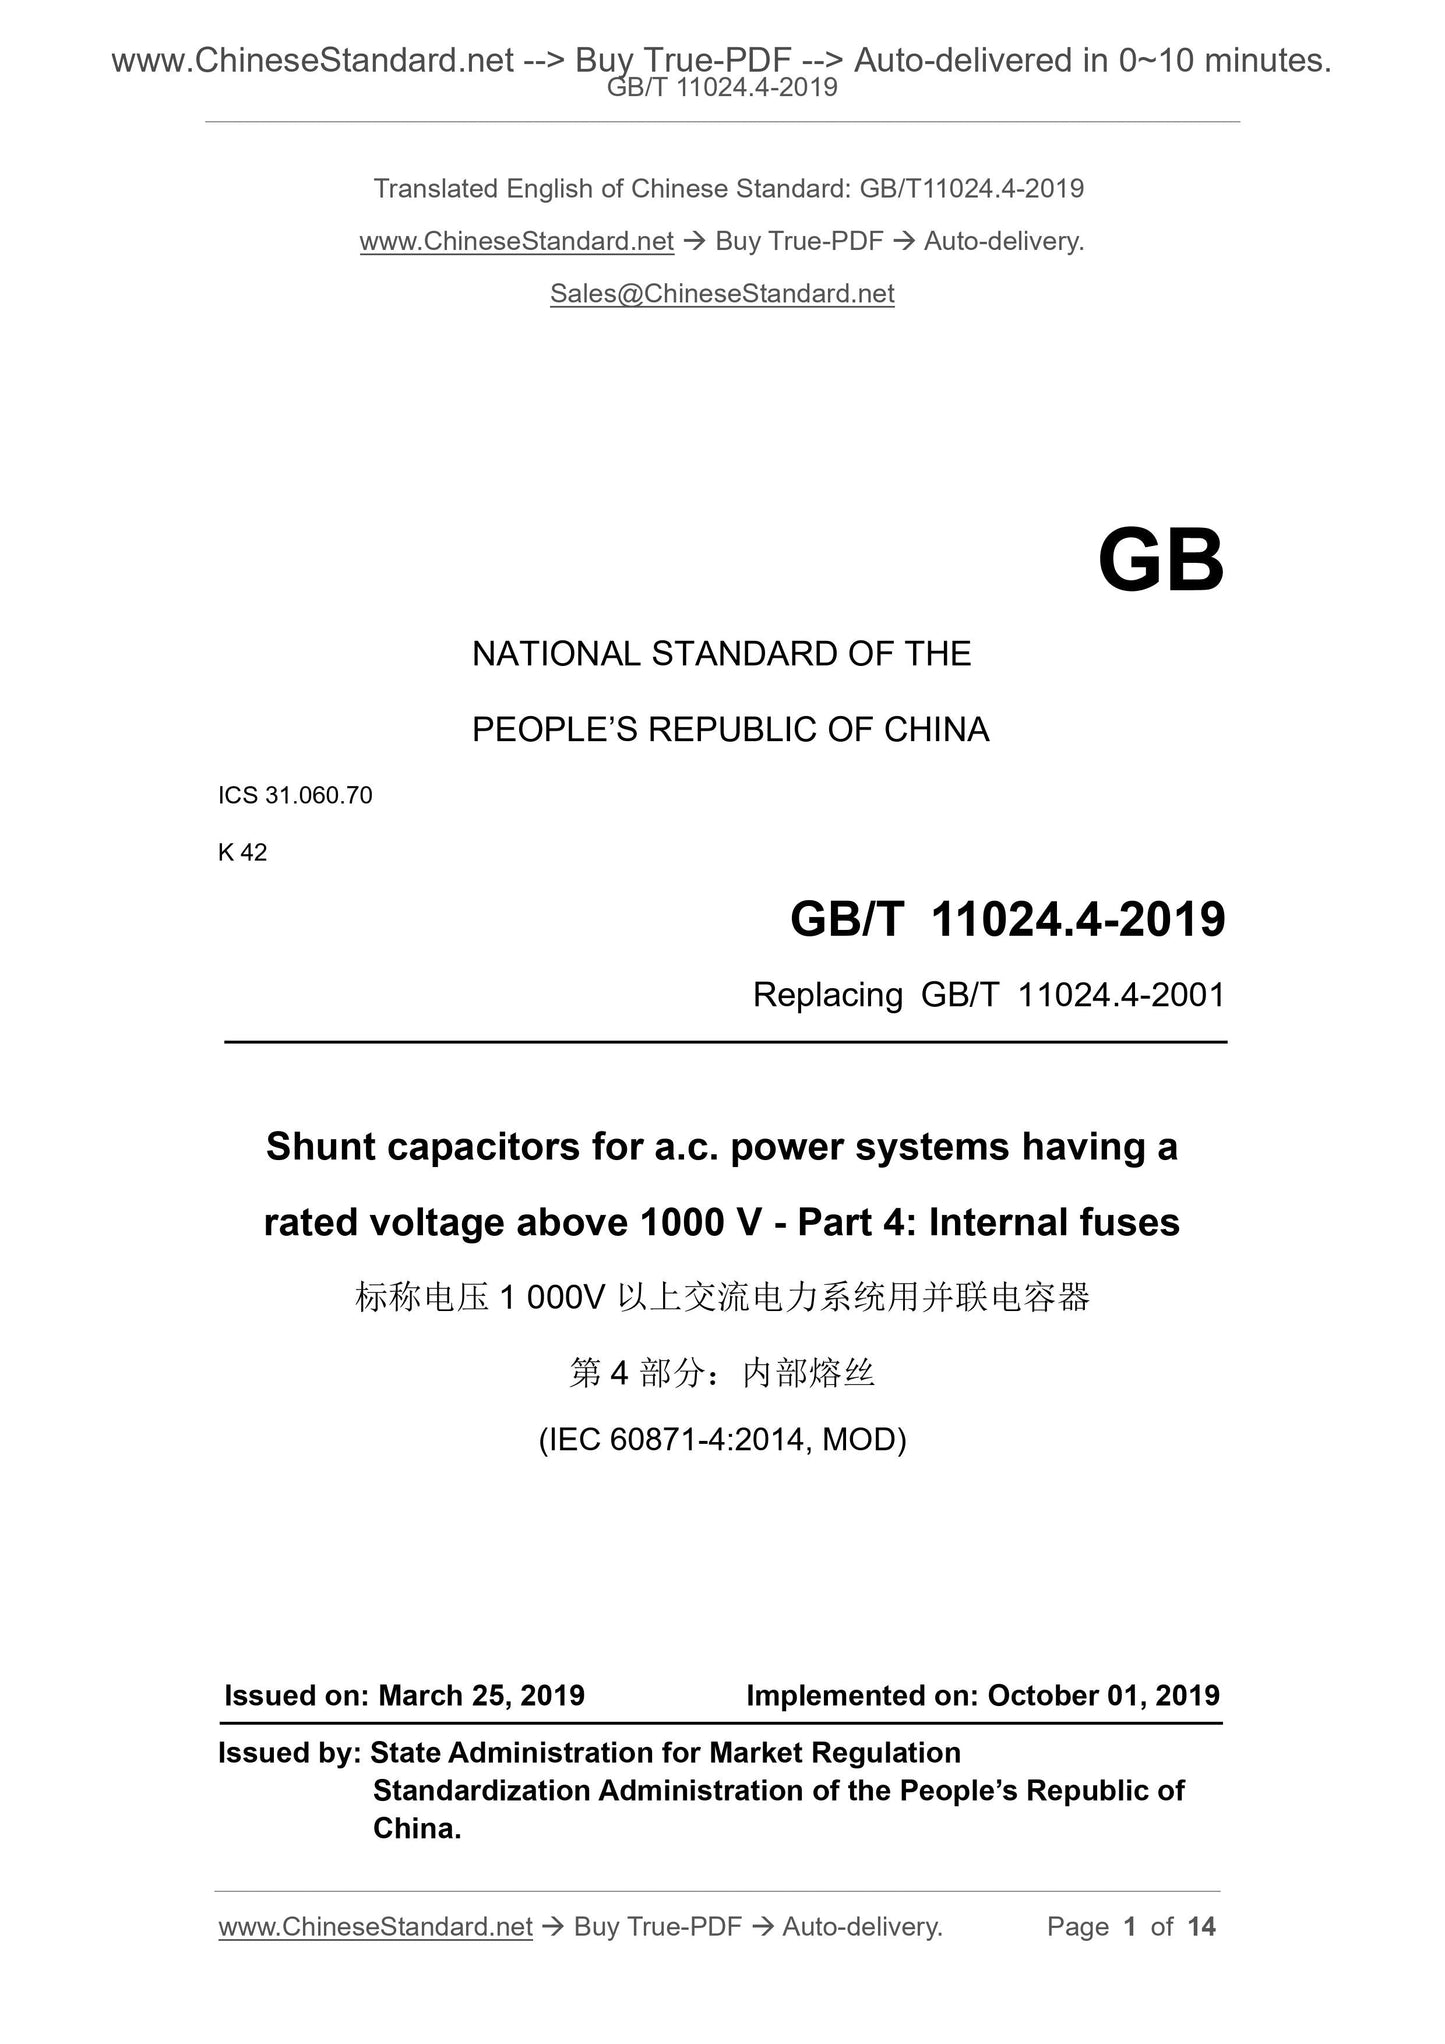 GB/T 11024.4-2019 Page 1